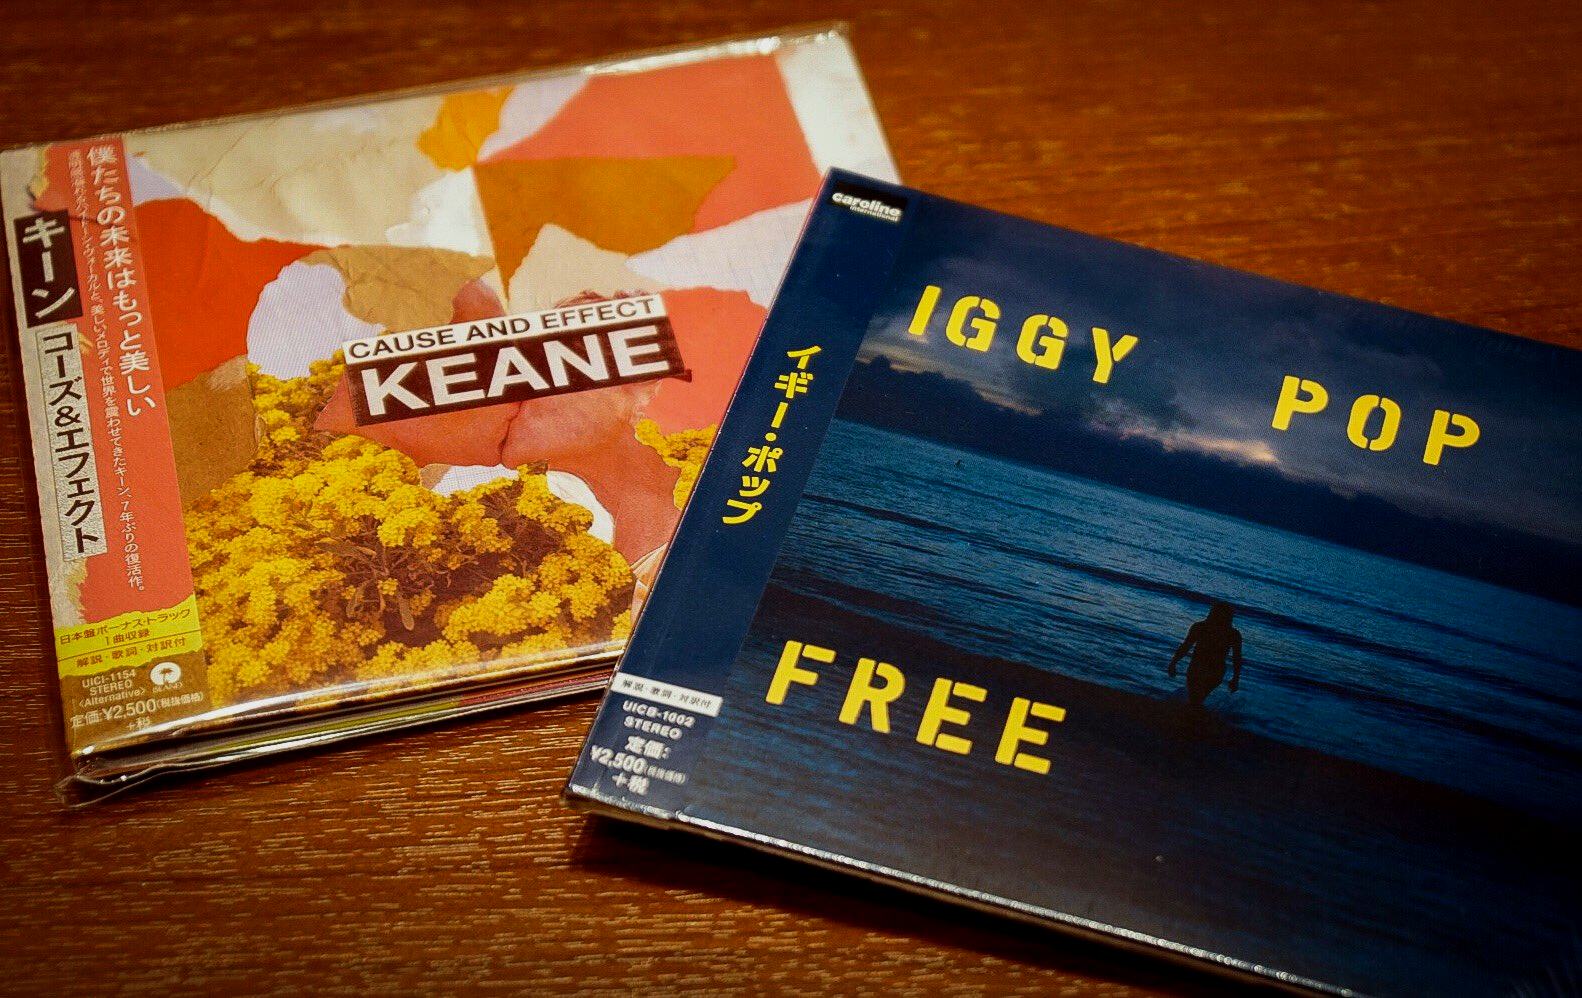 1.Free-Iggy Pop、Cause And Effect-Keane